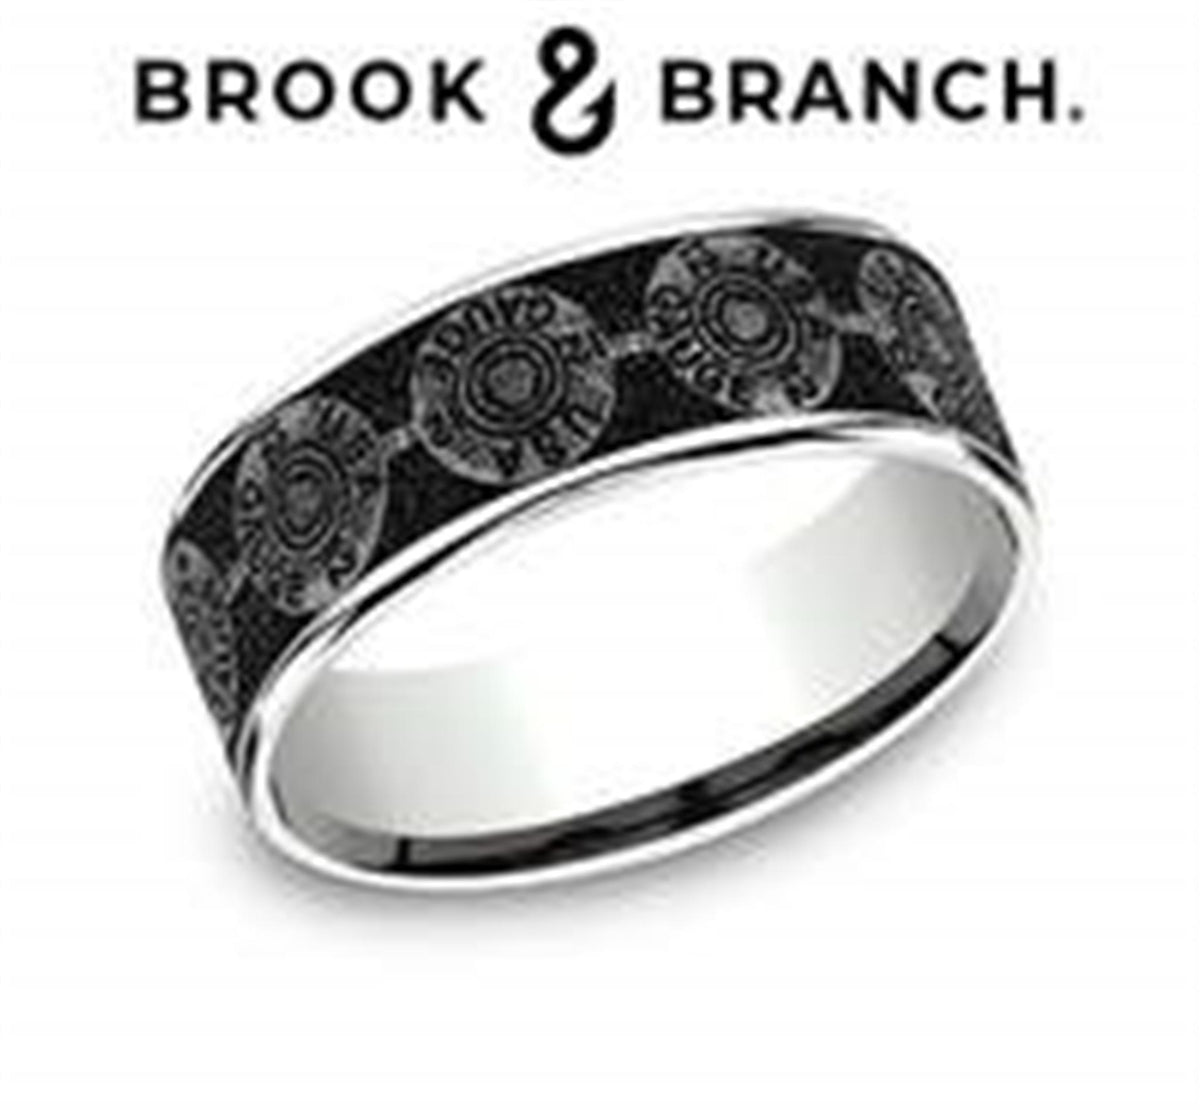 Brook & Branch 14Kt White Gold And Tantalum Band